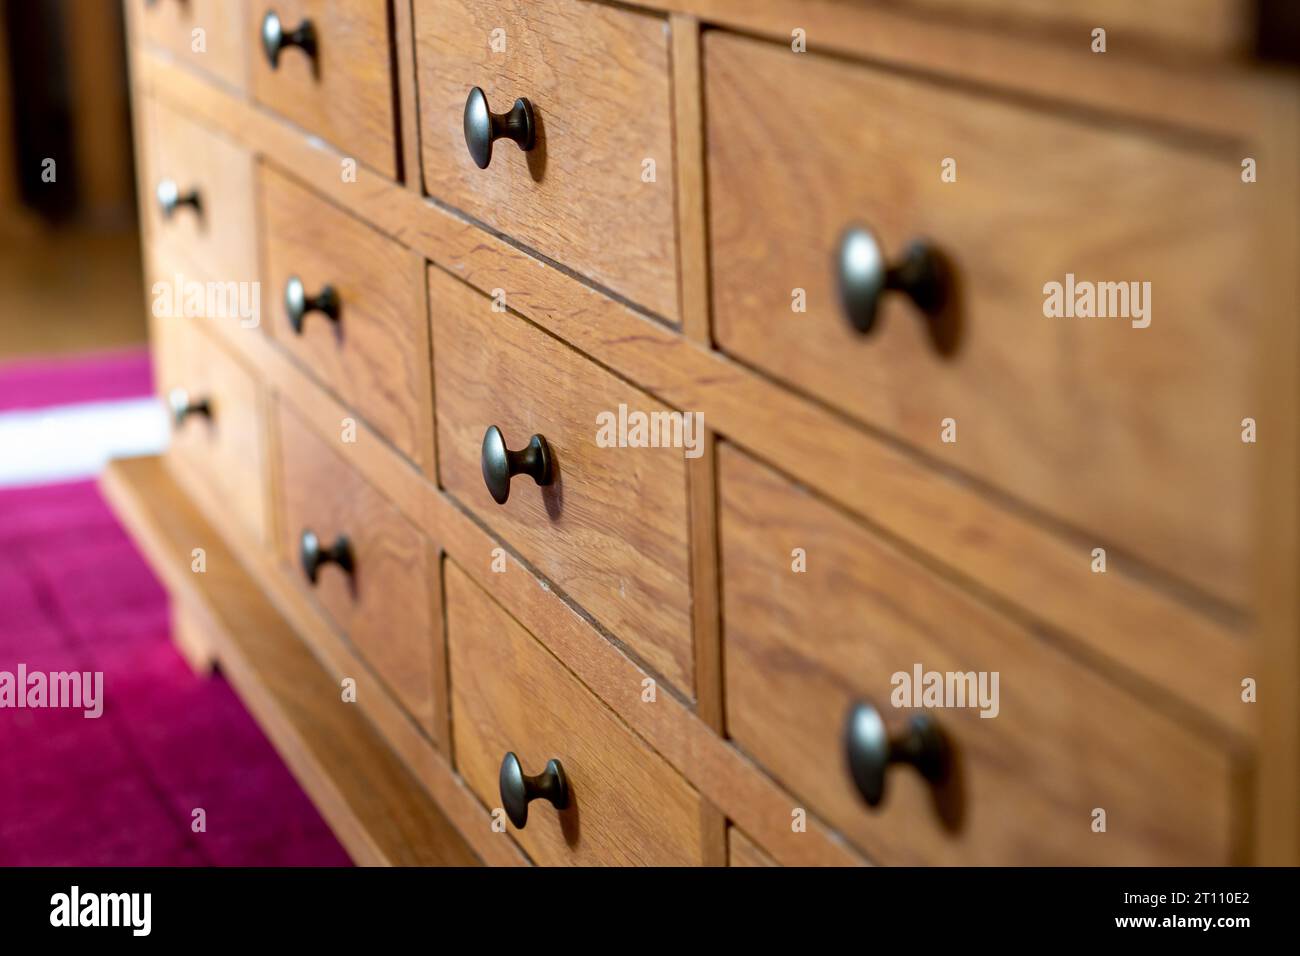 Cabinet of small drawers all closed. Wooden drawers with metal pull knobs. Selective focus on the second row of drawers. Storage in neat compartments Stock Photo